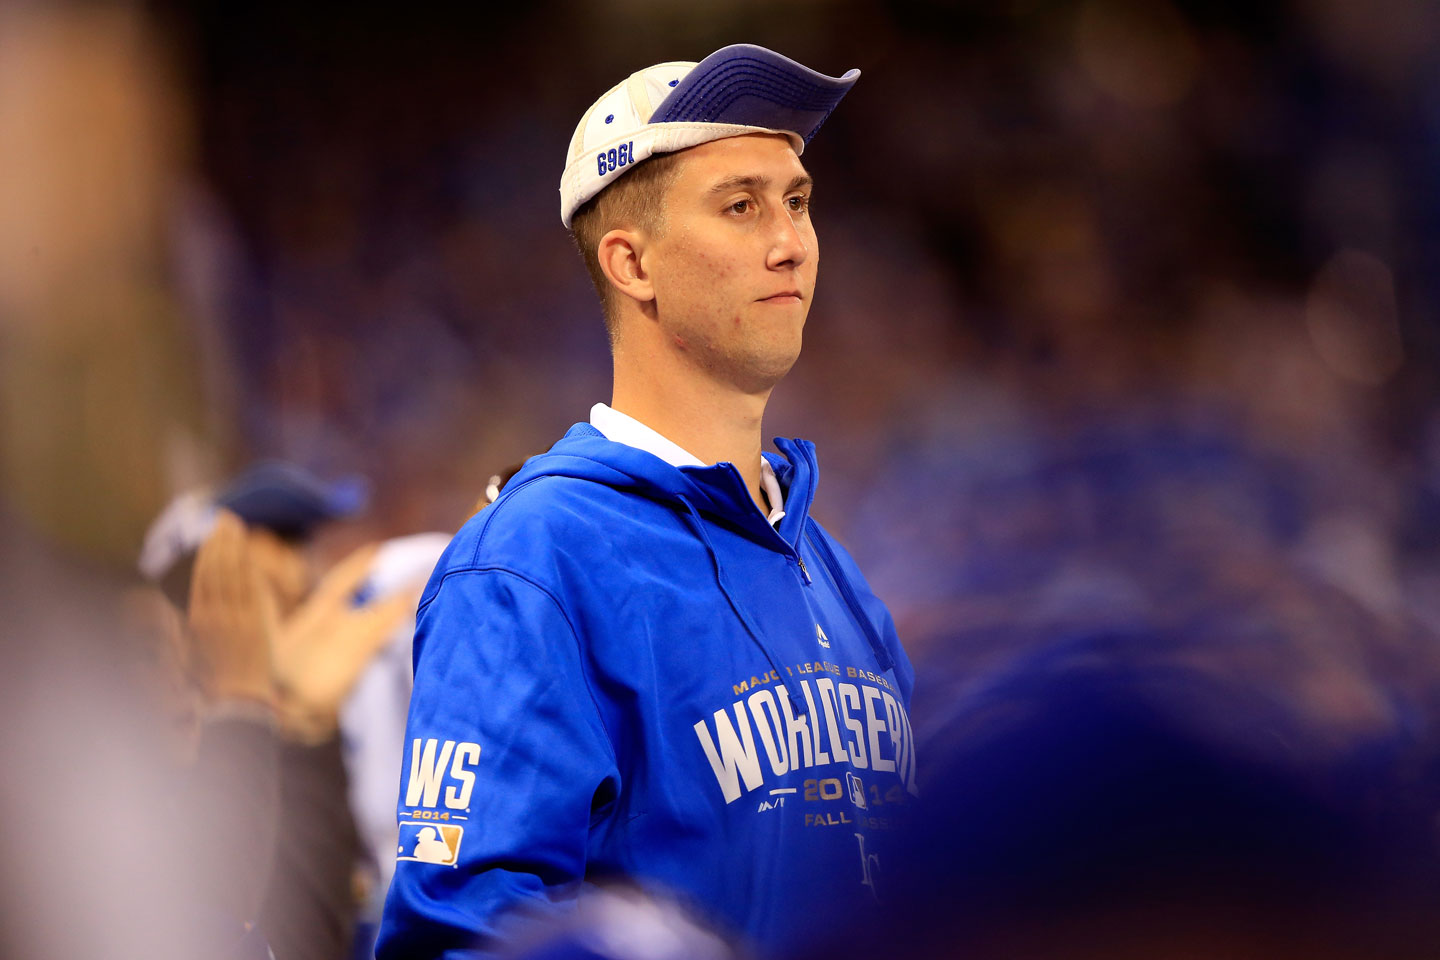 Royals' rally caps? Ineffective. Giants win, 7-1, jumping to a 1-0 lead in the World Series. (Jamie Squire/Getty Images)